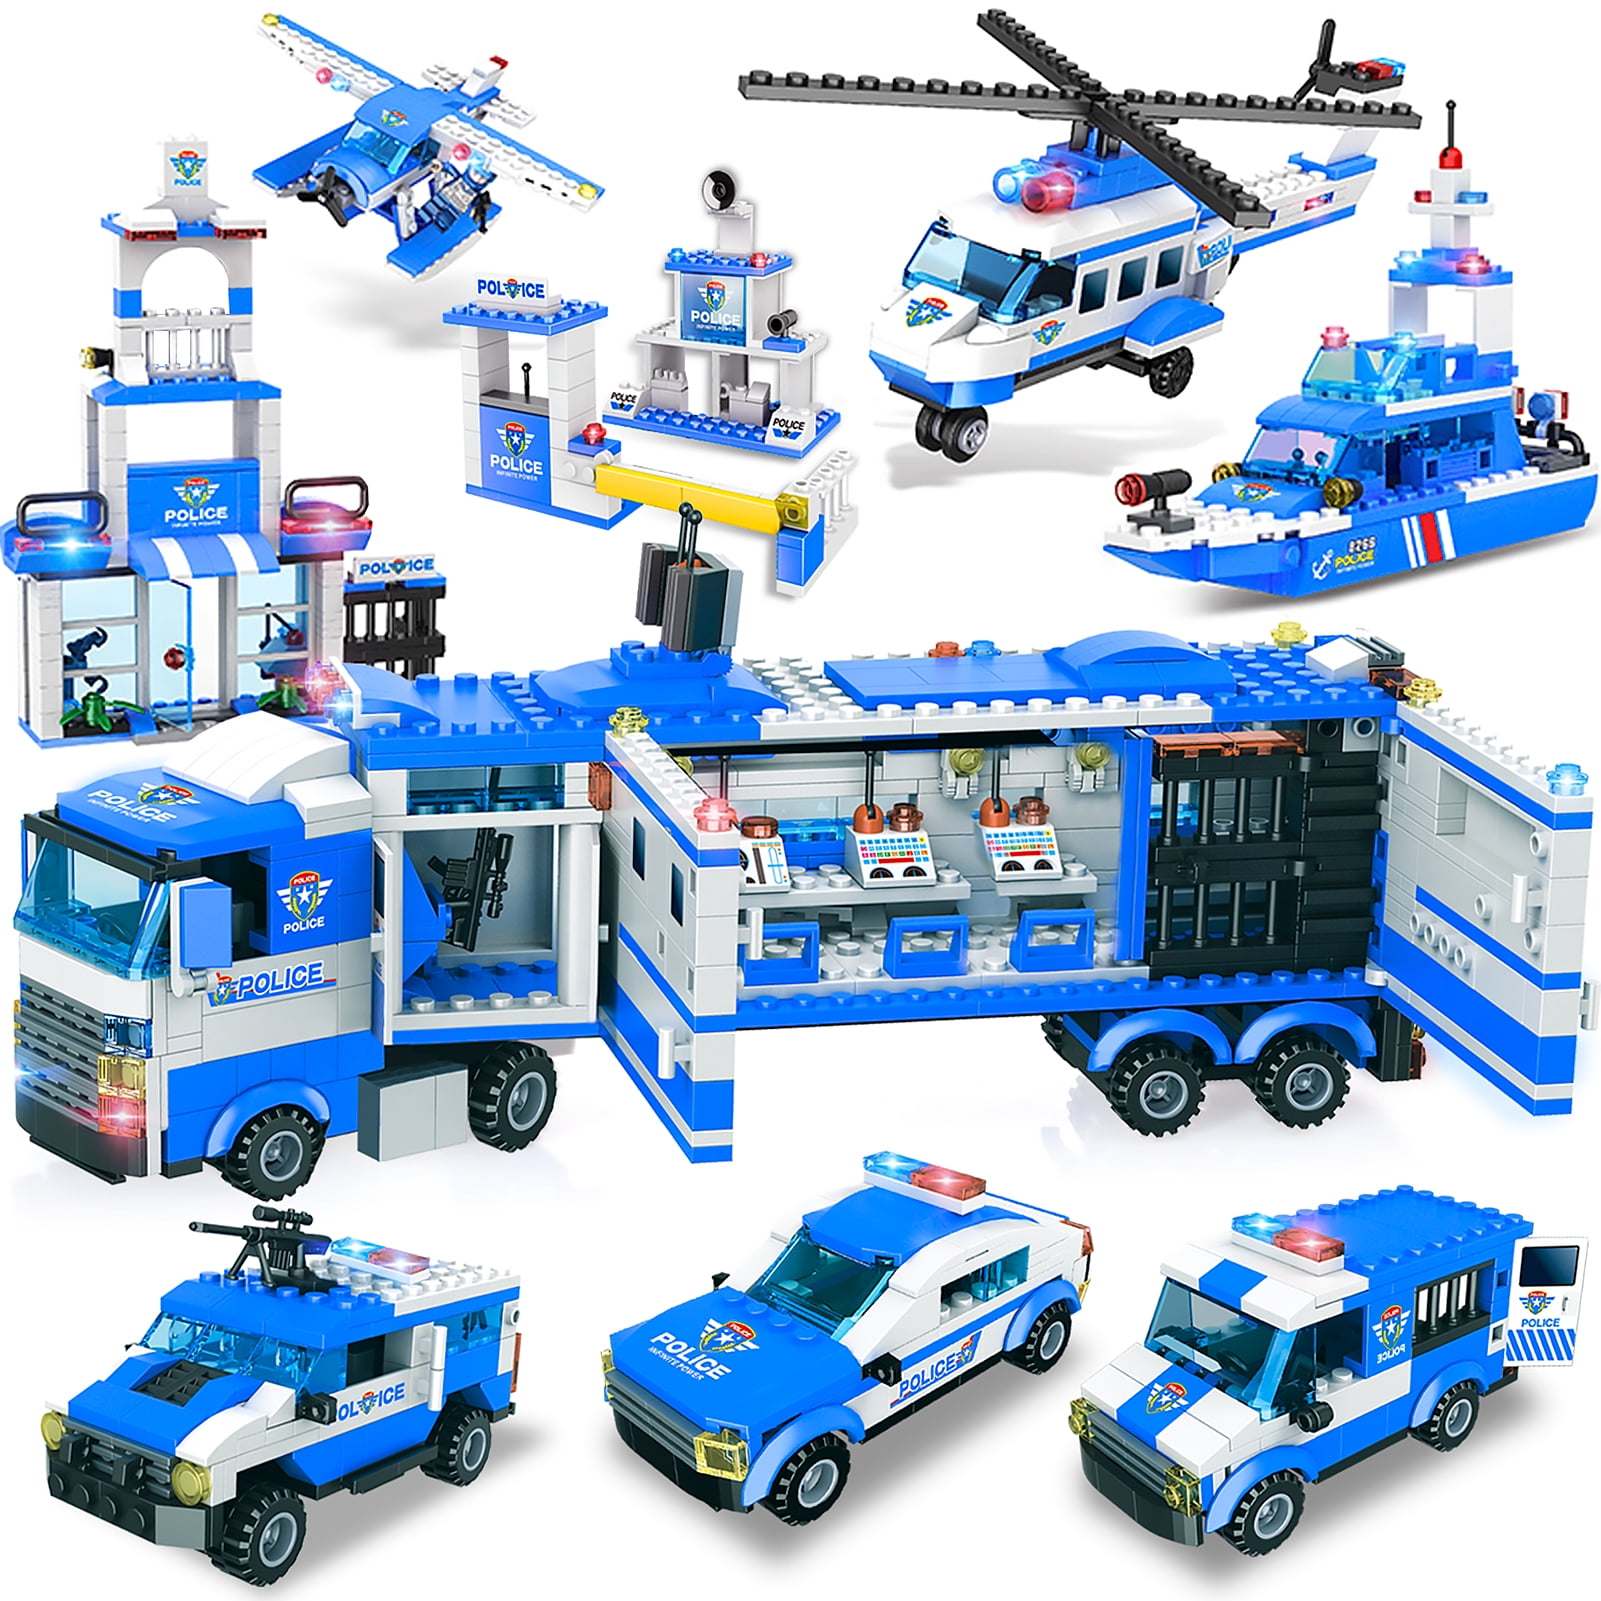 3 in 1 Police Station Aircraft Vehicle Building Block Bricks Kid Educational Toy 